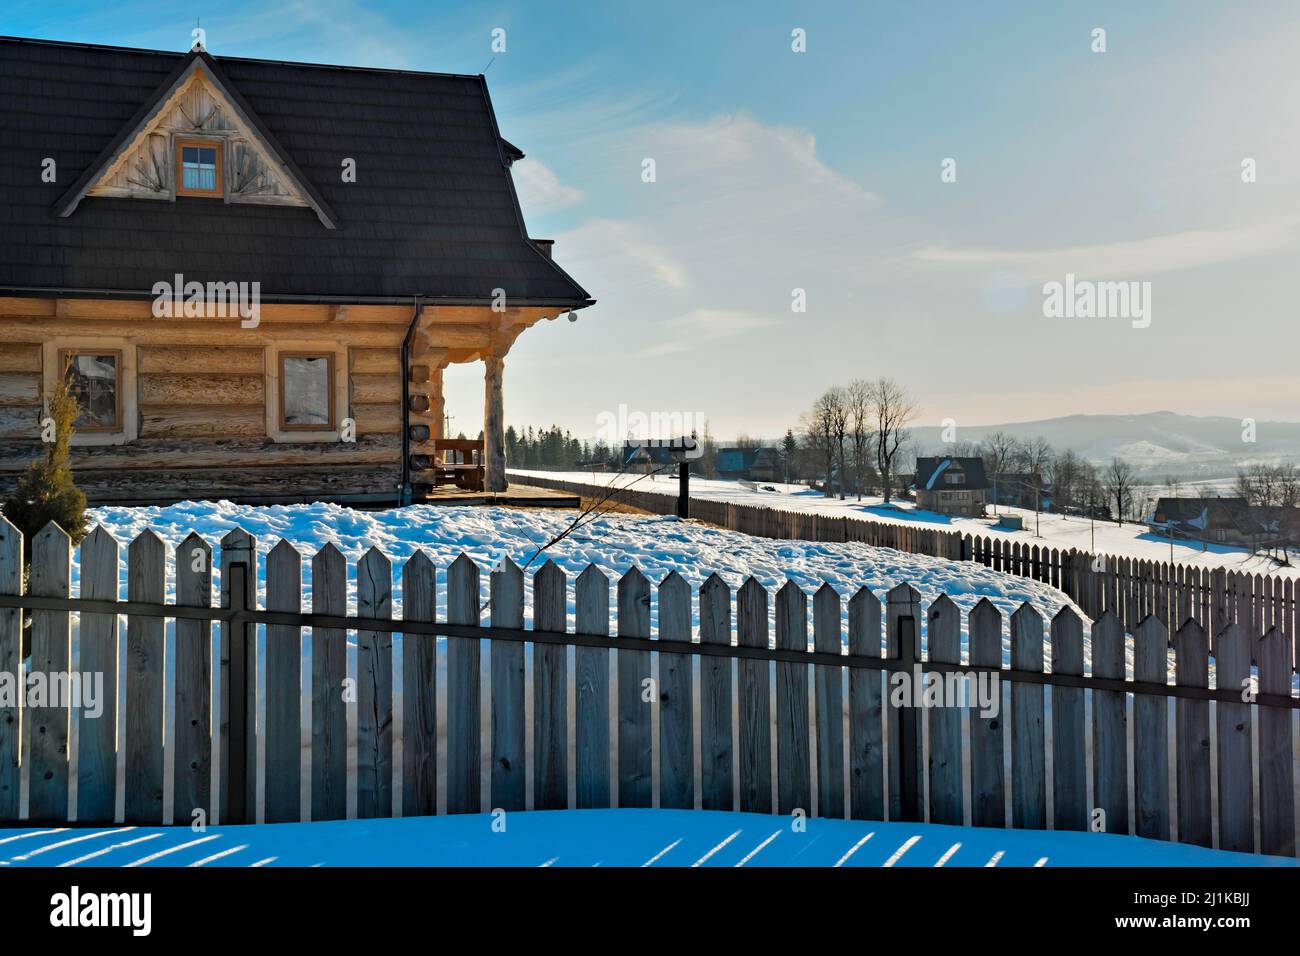 Winter mountain landscape in the Tatra with traditional mountain huts Stock Photo